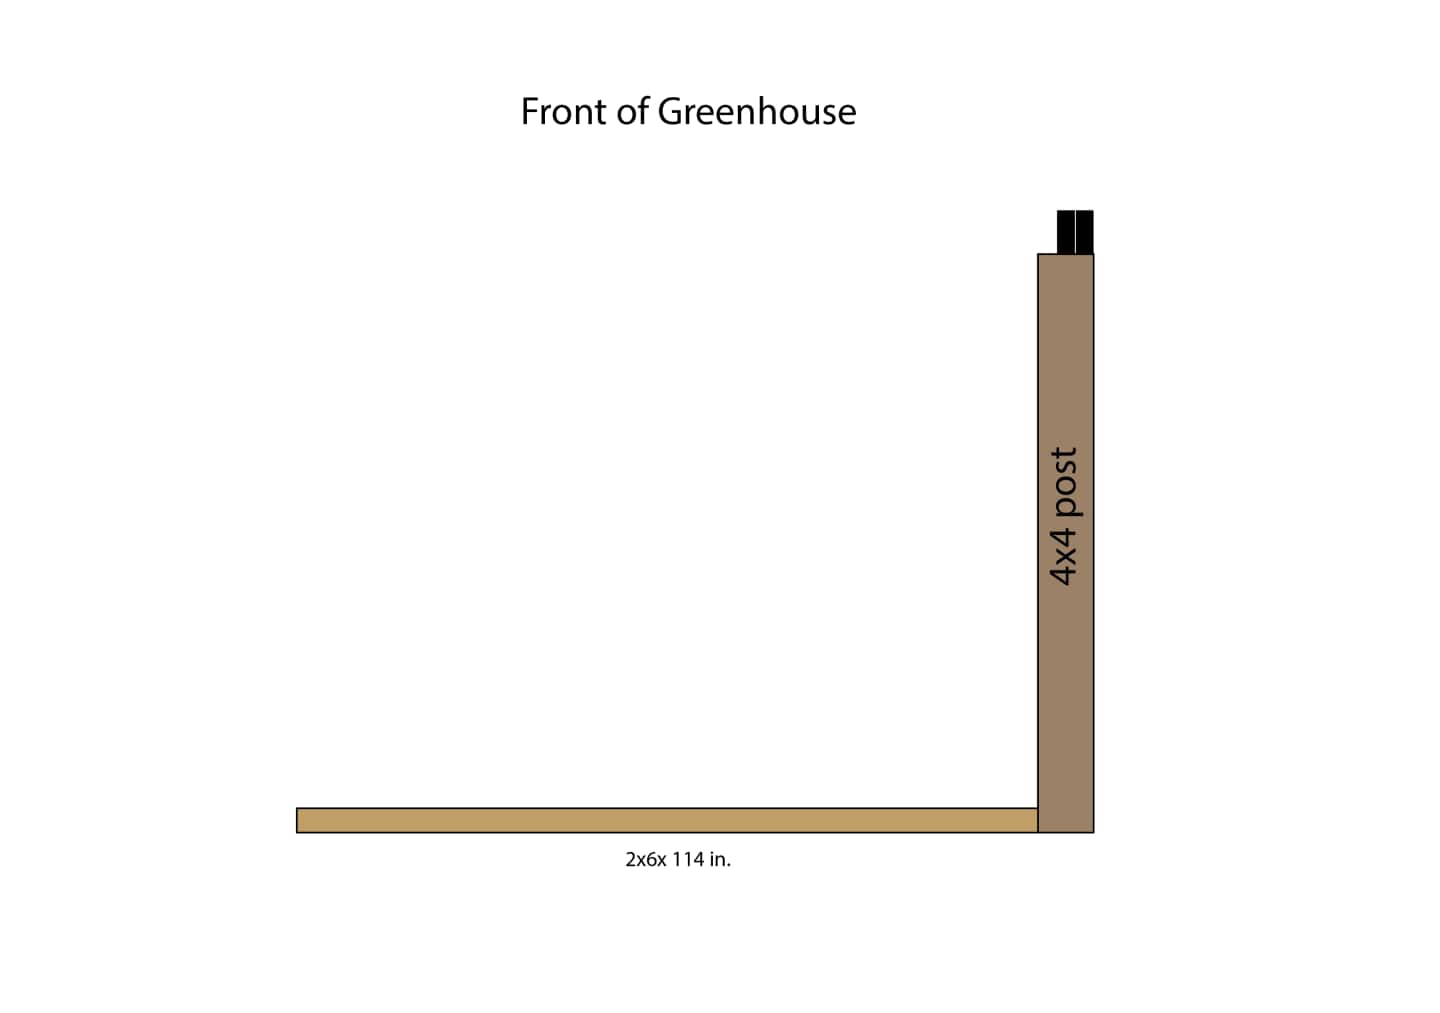 Diagram of the front sill of the greenhouse.